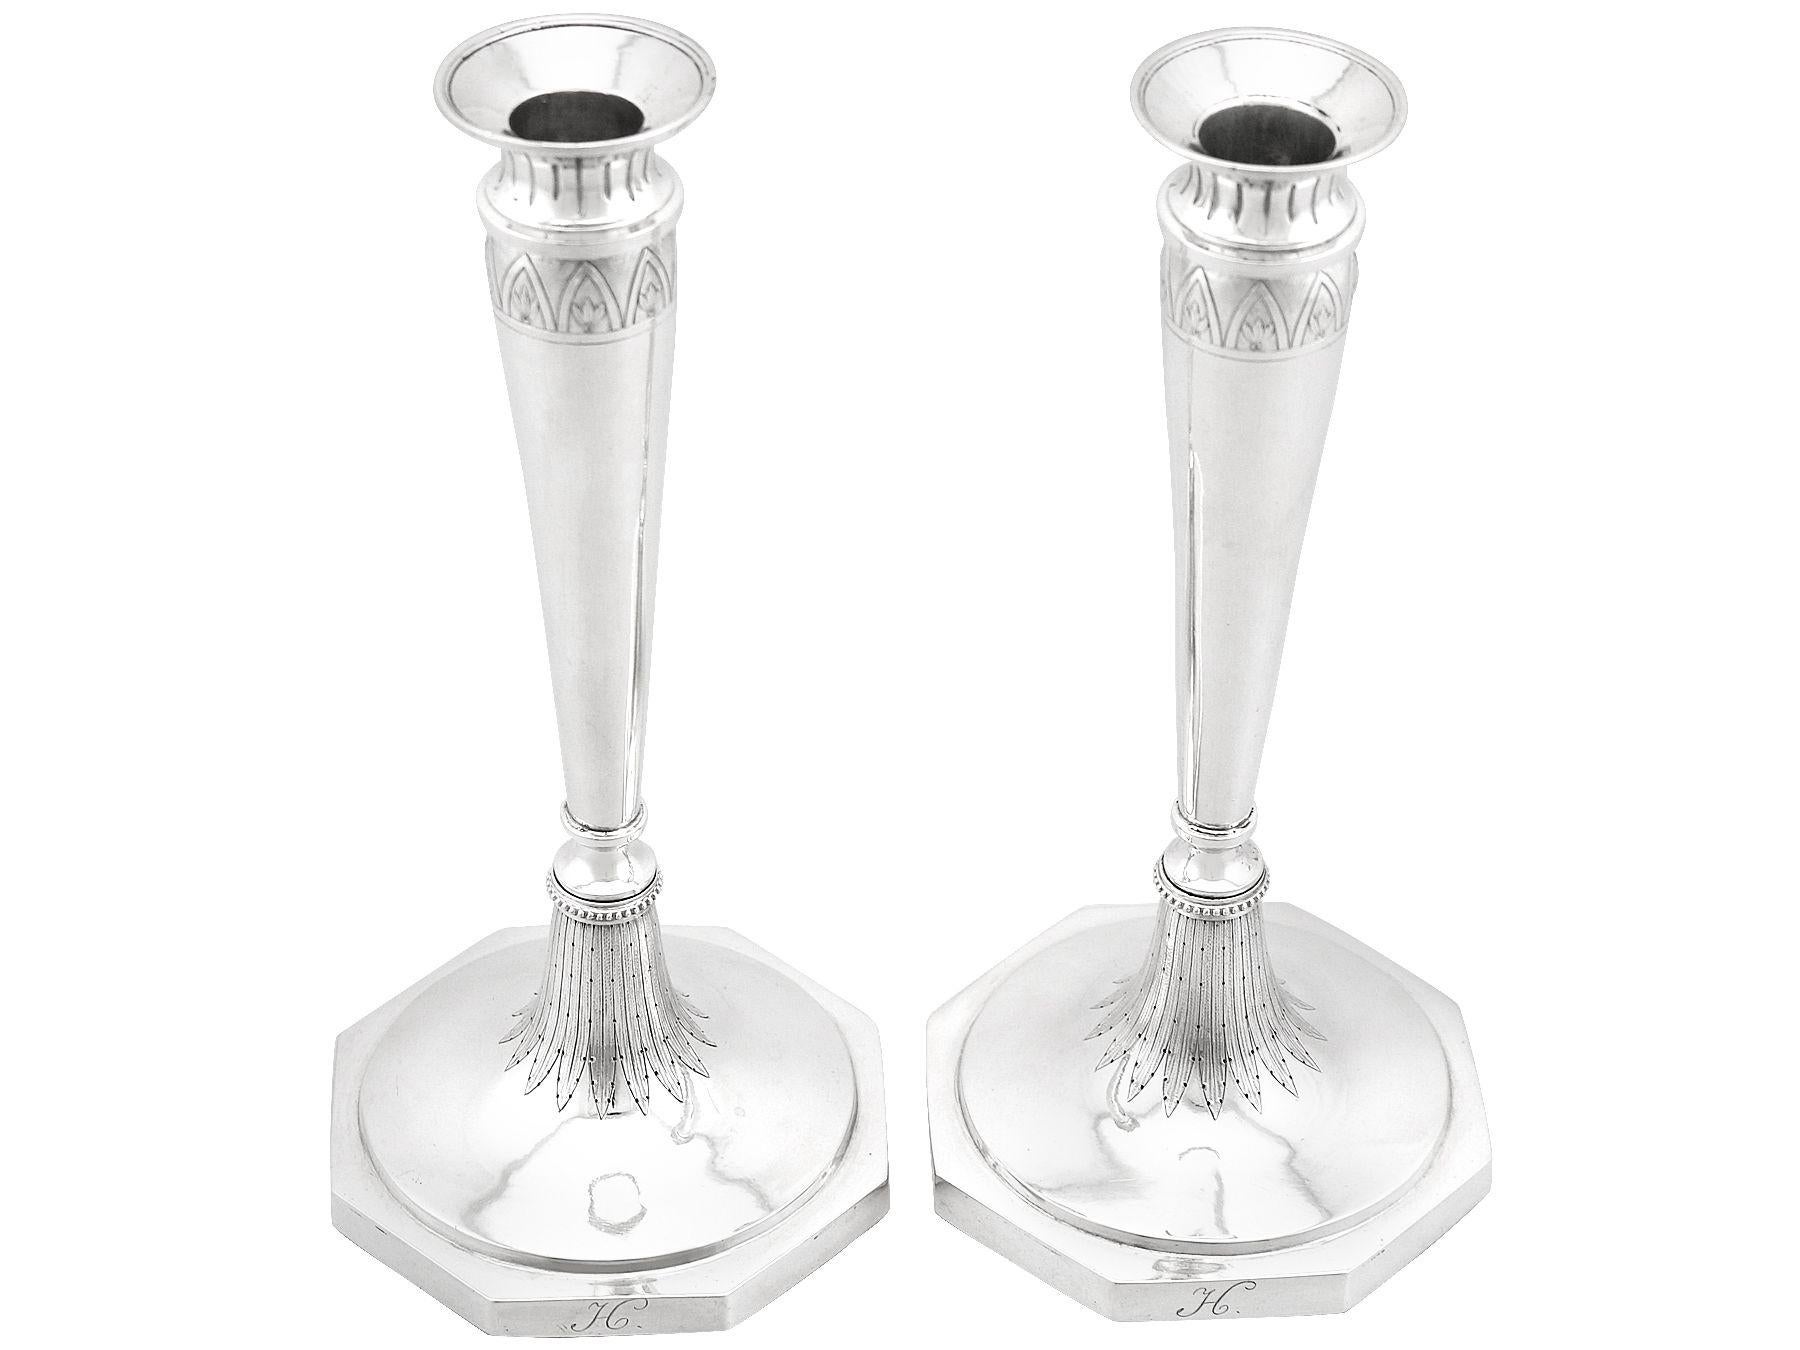 An exceptional, fine and impressive pair of antique European silver candlesticks; an addition to our continental silverware collection.

These exceptional antique European silver candlesticks have a circular rounded form to a hexagonal shaped